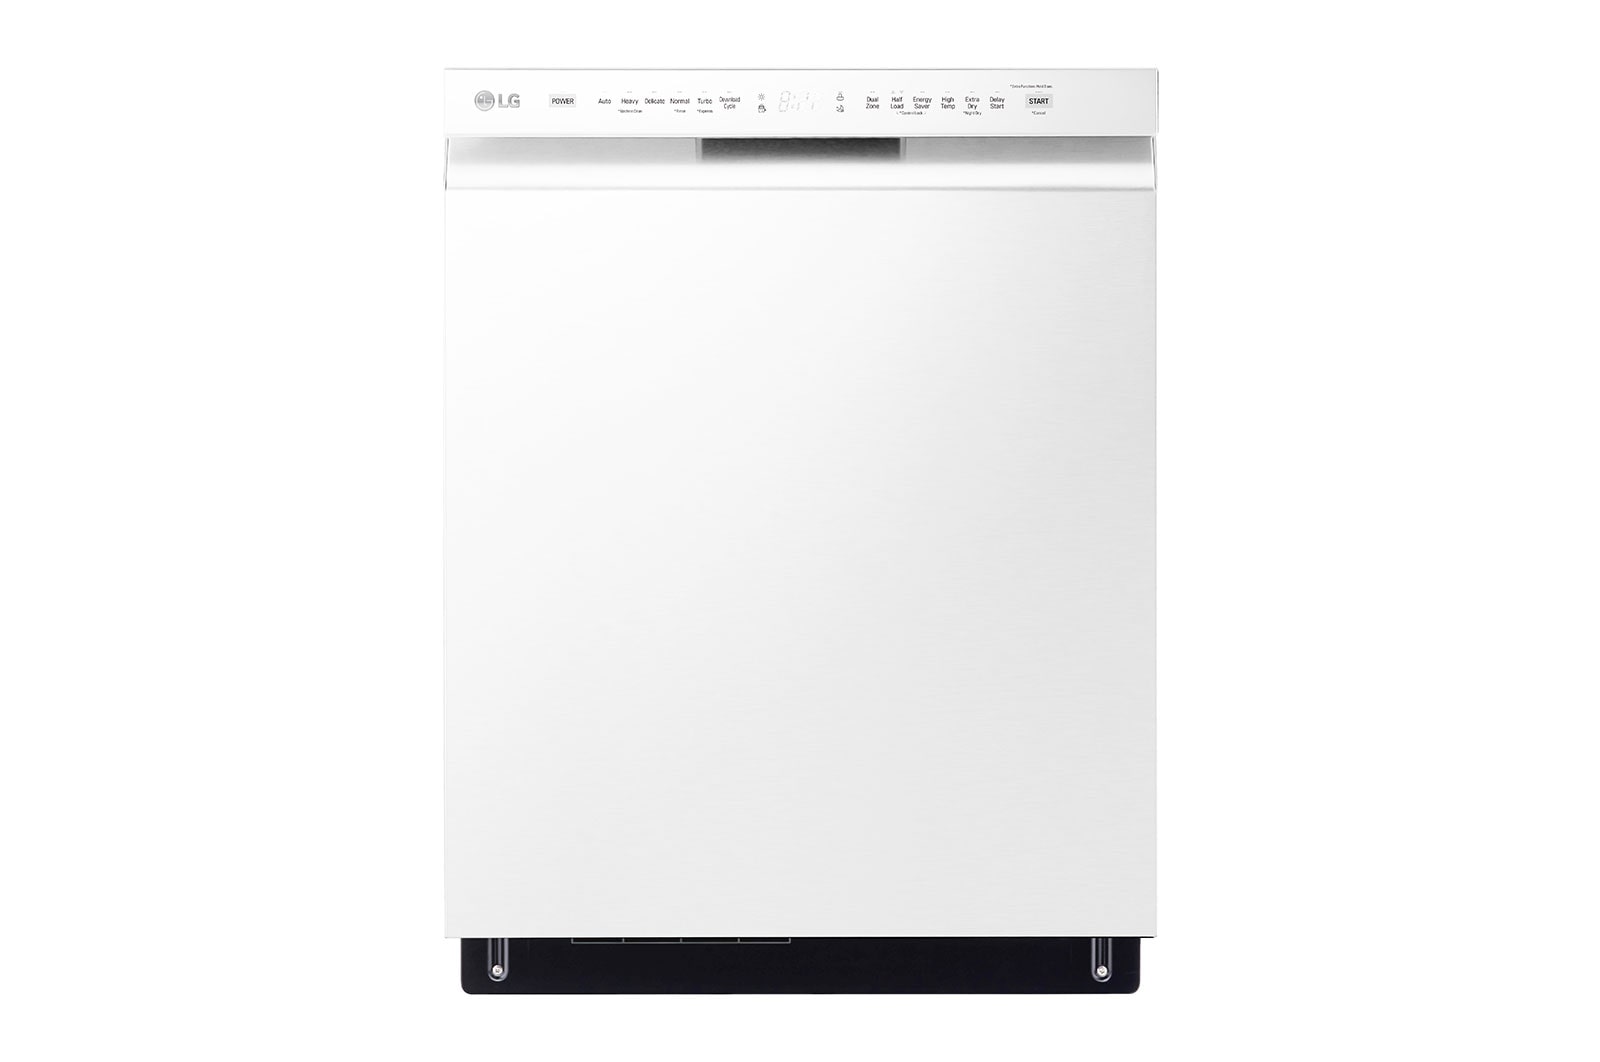 Lg LDFN4542W Front Control Dishwasher With Quadwash™ And 3Rd Rack